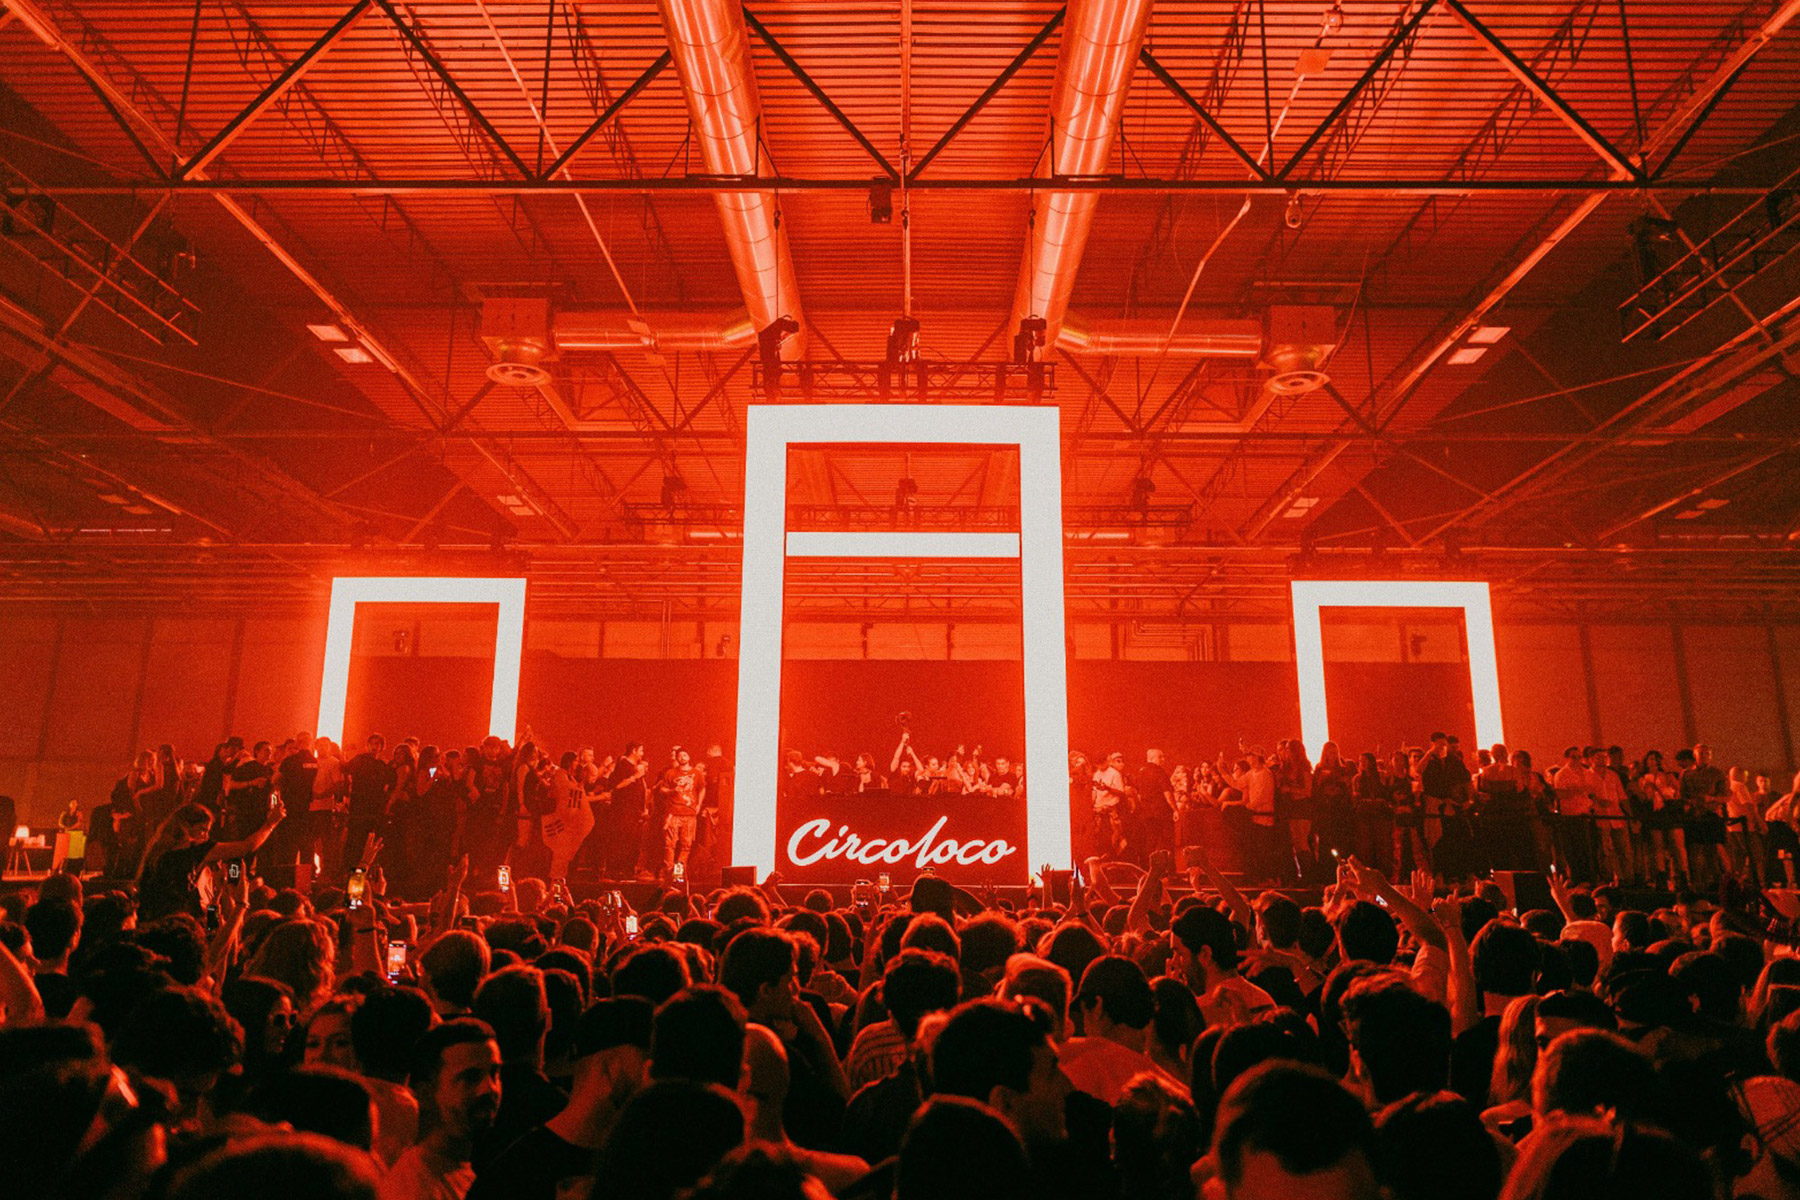 Circoloco prepares its yearly reunion in Madrid